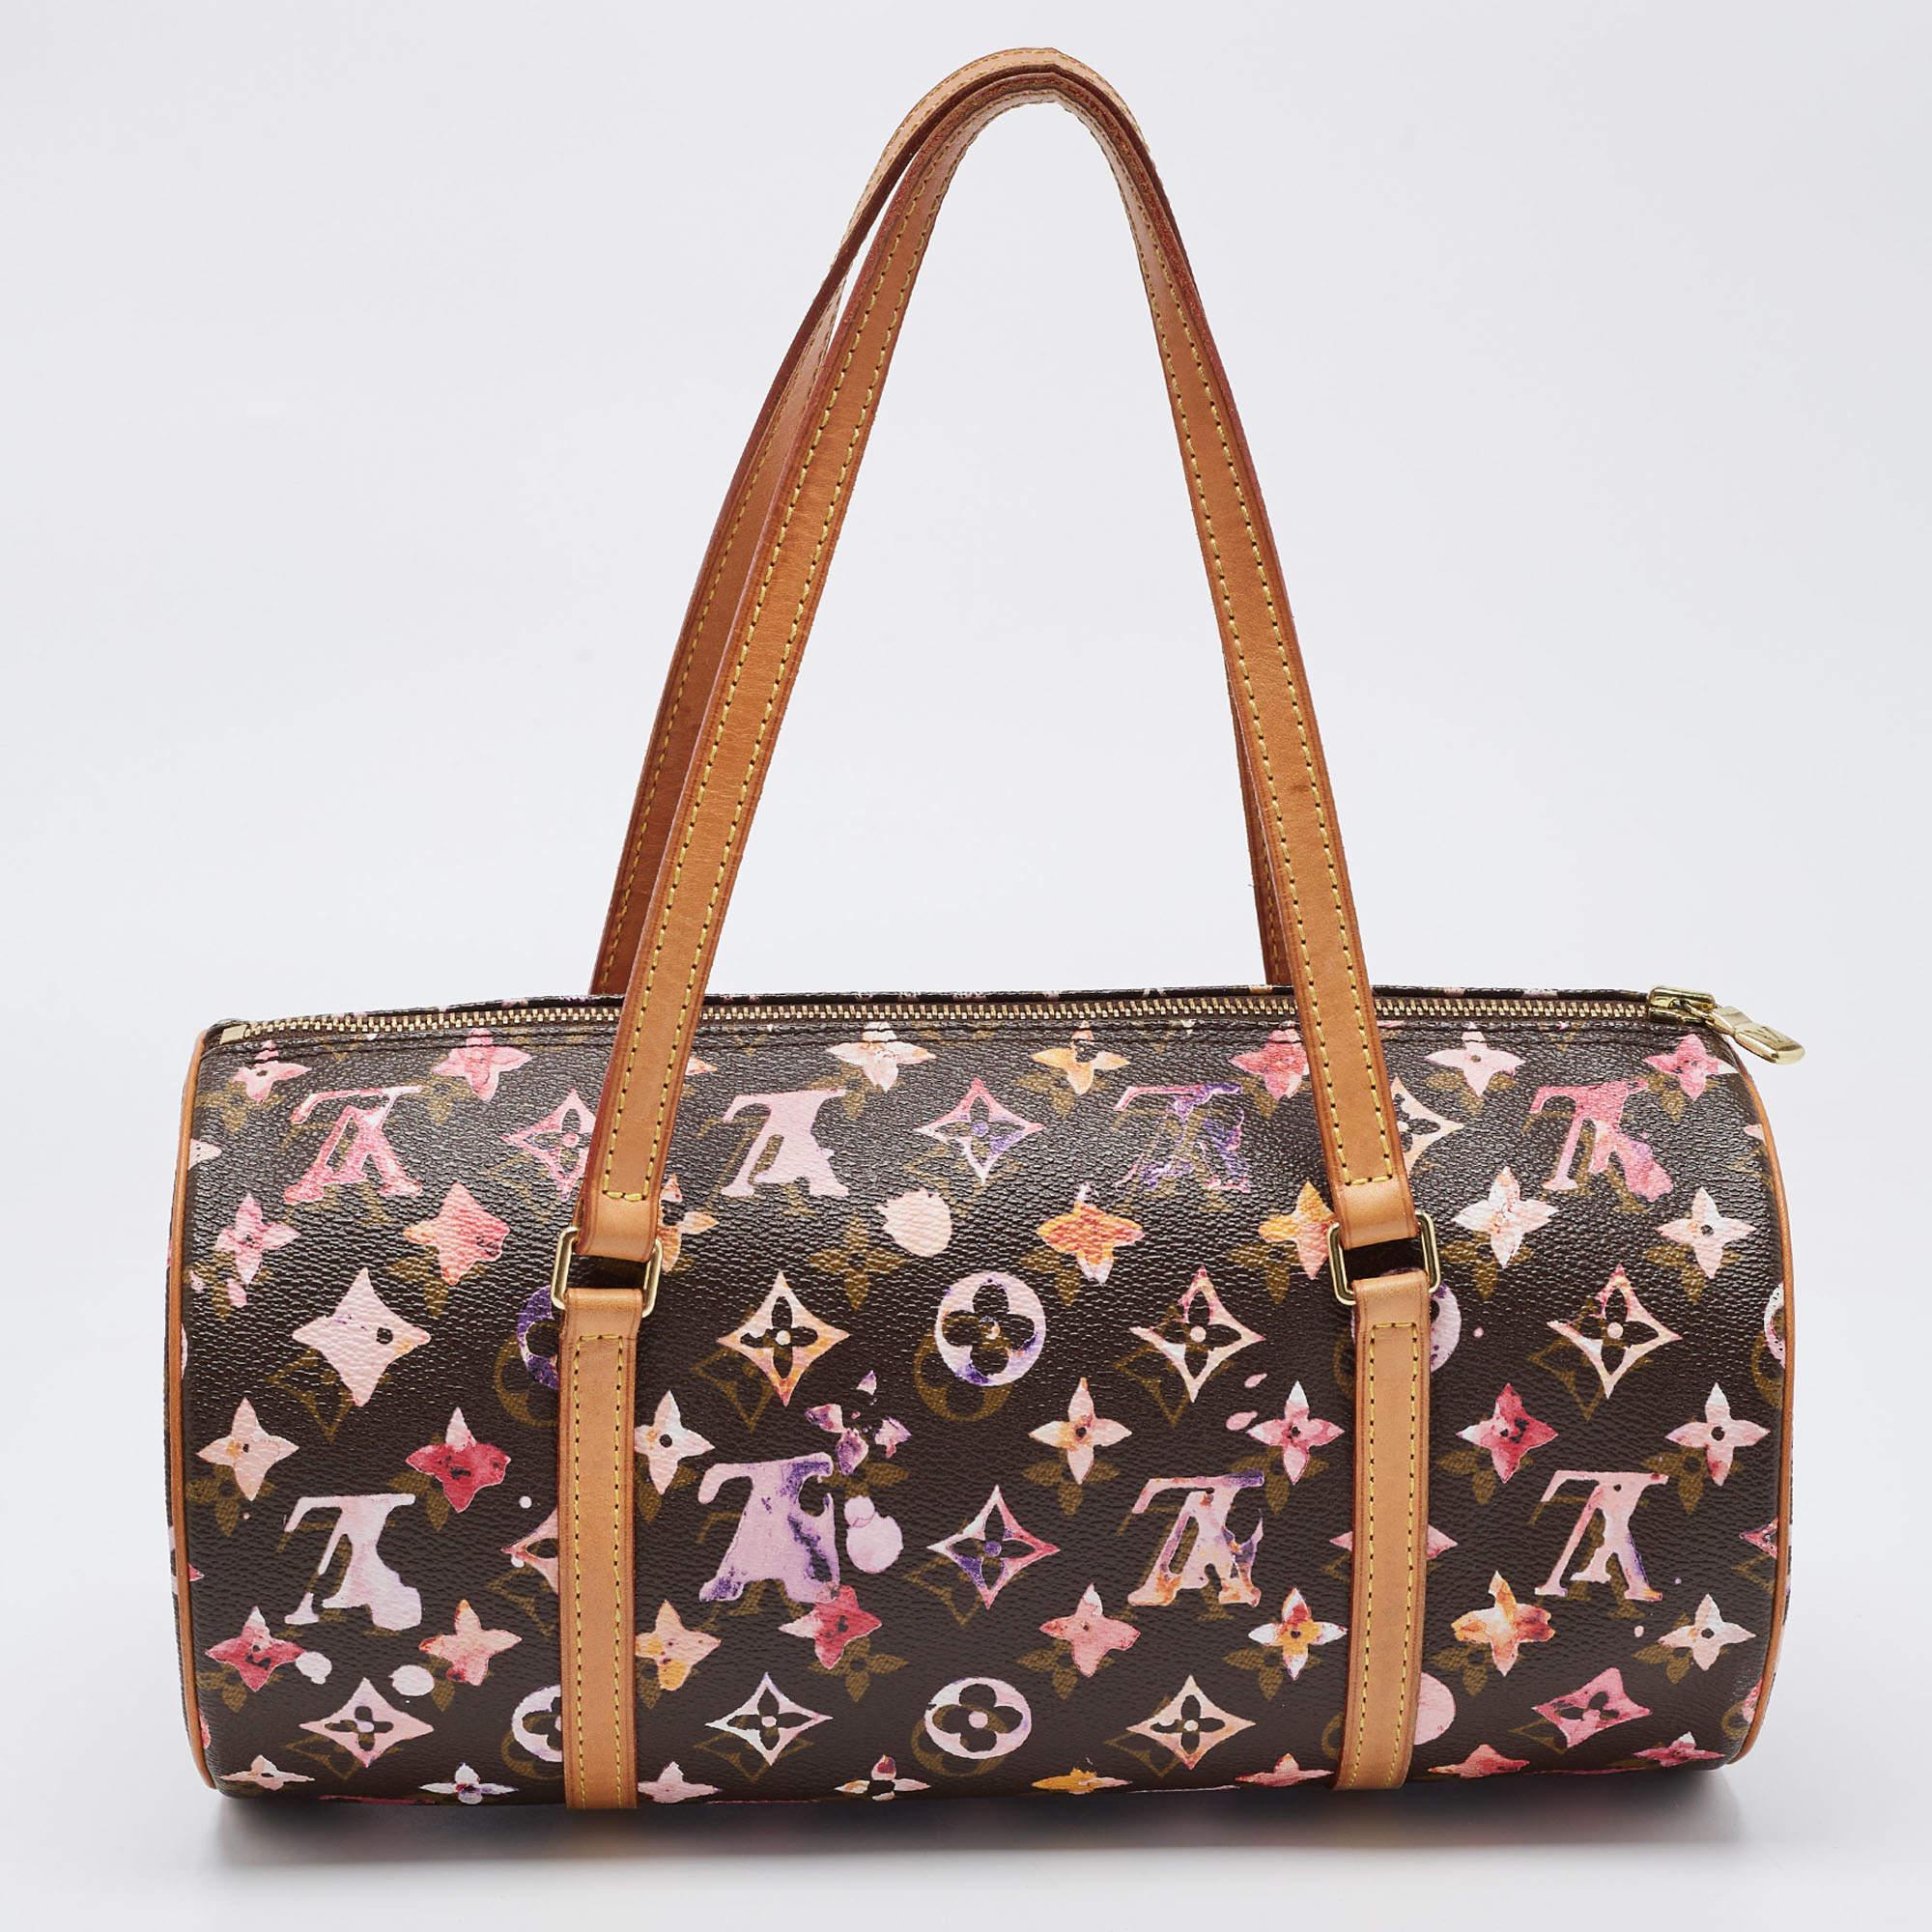 For their Spring/Summer 2008 line, Louis Vuitton collaborated with Richard Prince. The Watercolor Monogram, inspired by Prince's paintings, comes alive in 17 different colors on this Papillon 30. The Papillon is a classic of LV and to see this